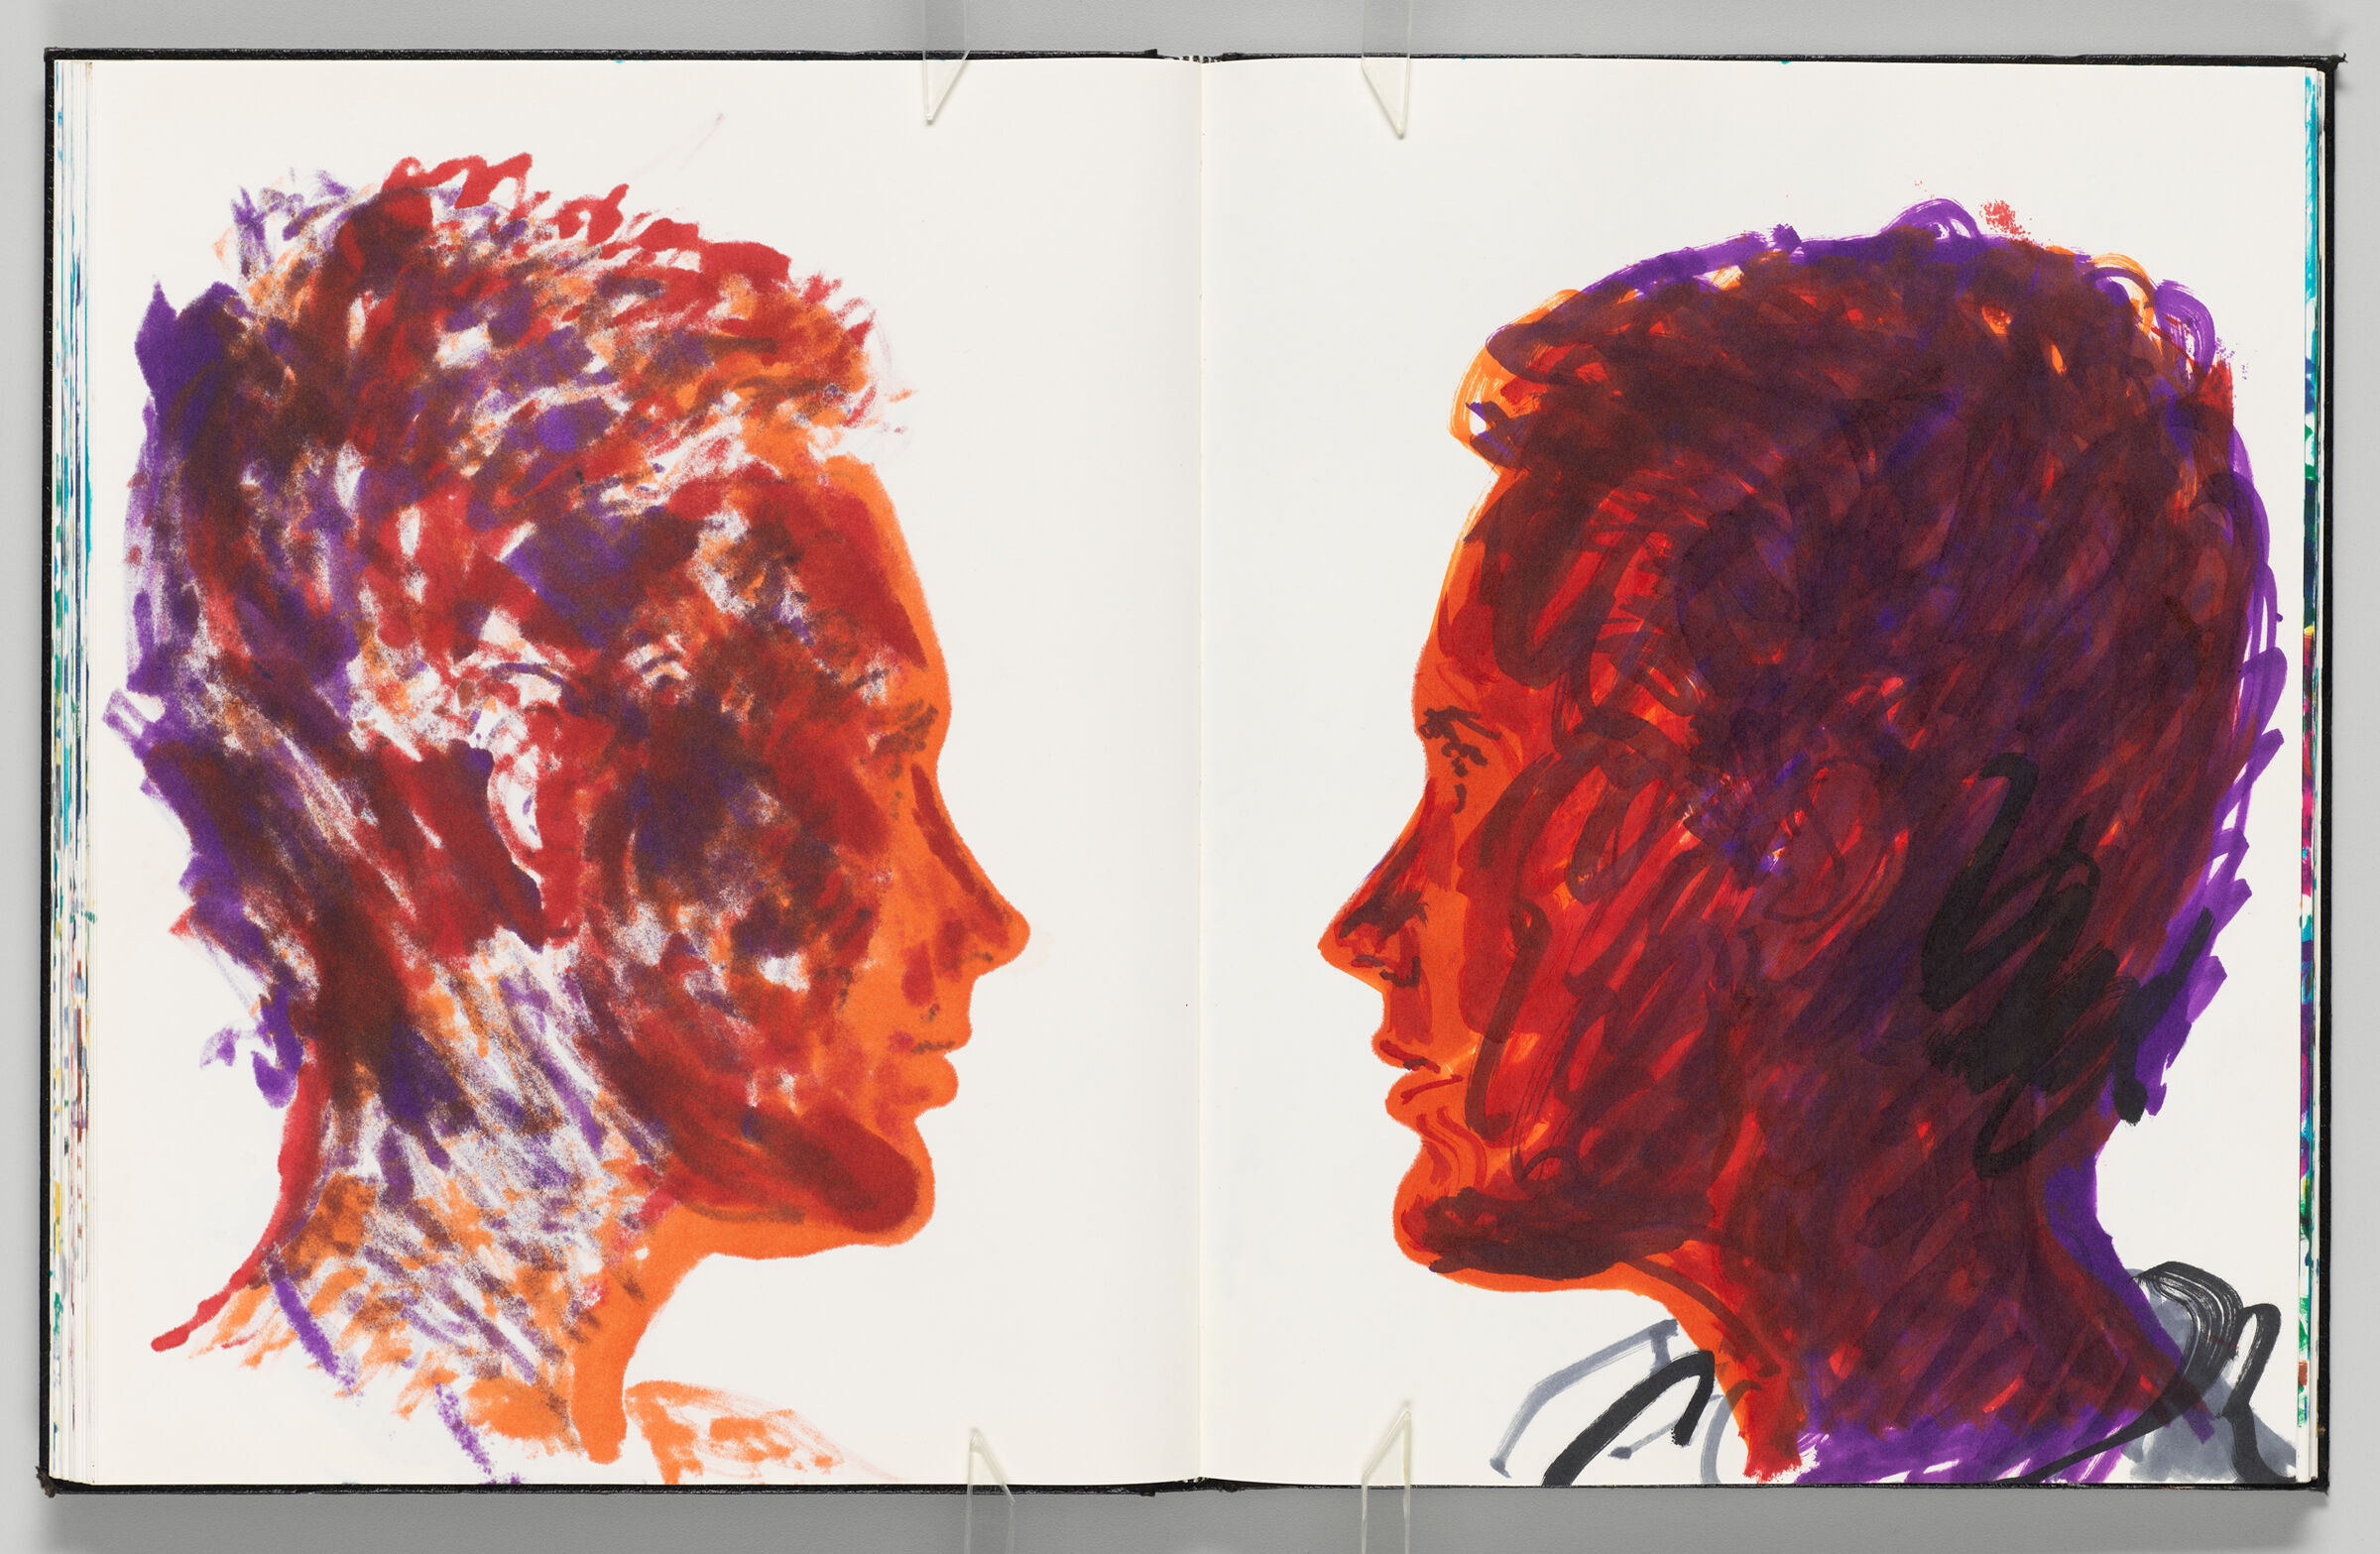 Untitled (Bleed-Through Of Previous Page, Left Page); Untitled (Female Figure [Elizabeth] In Profile, Right Page)